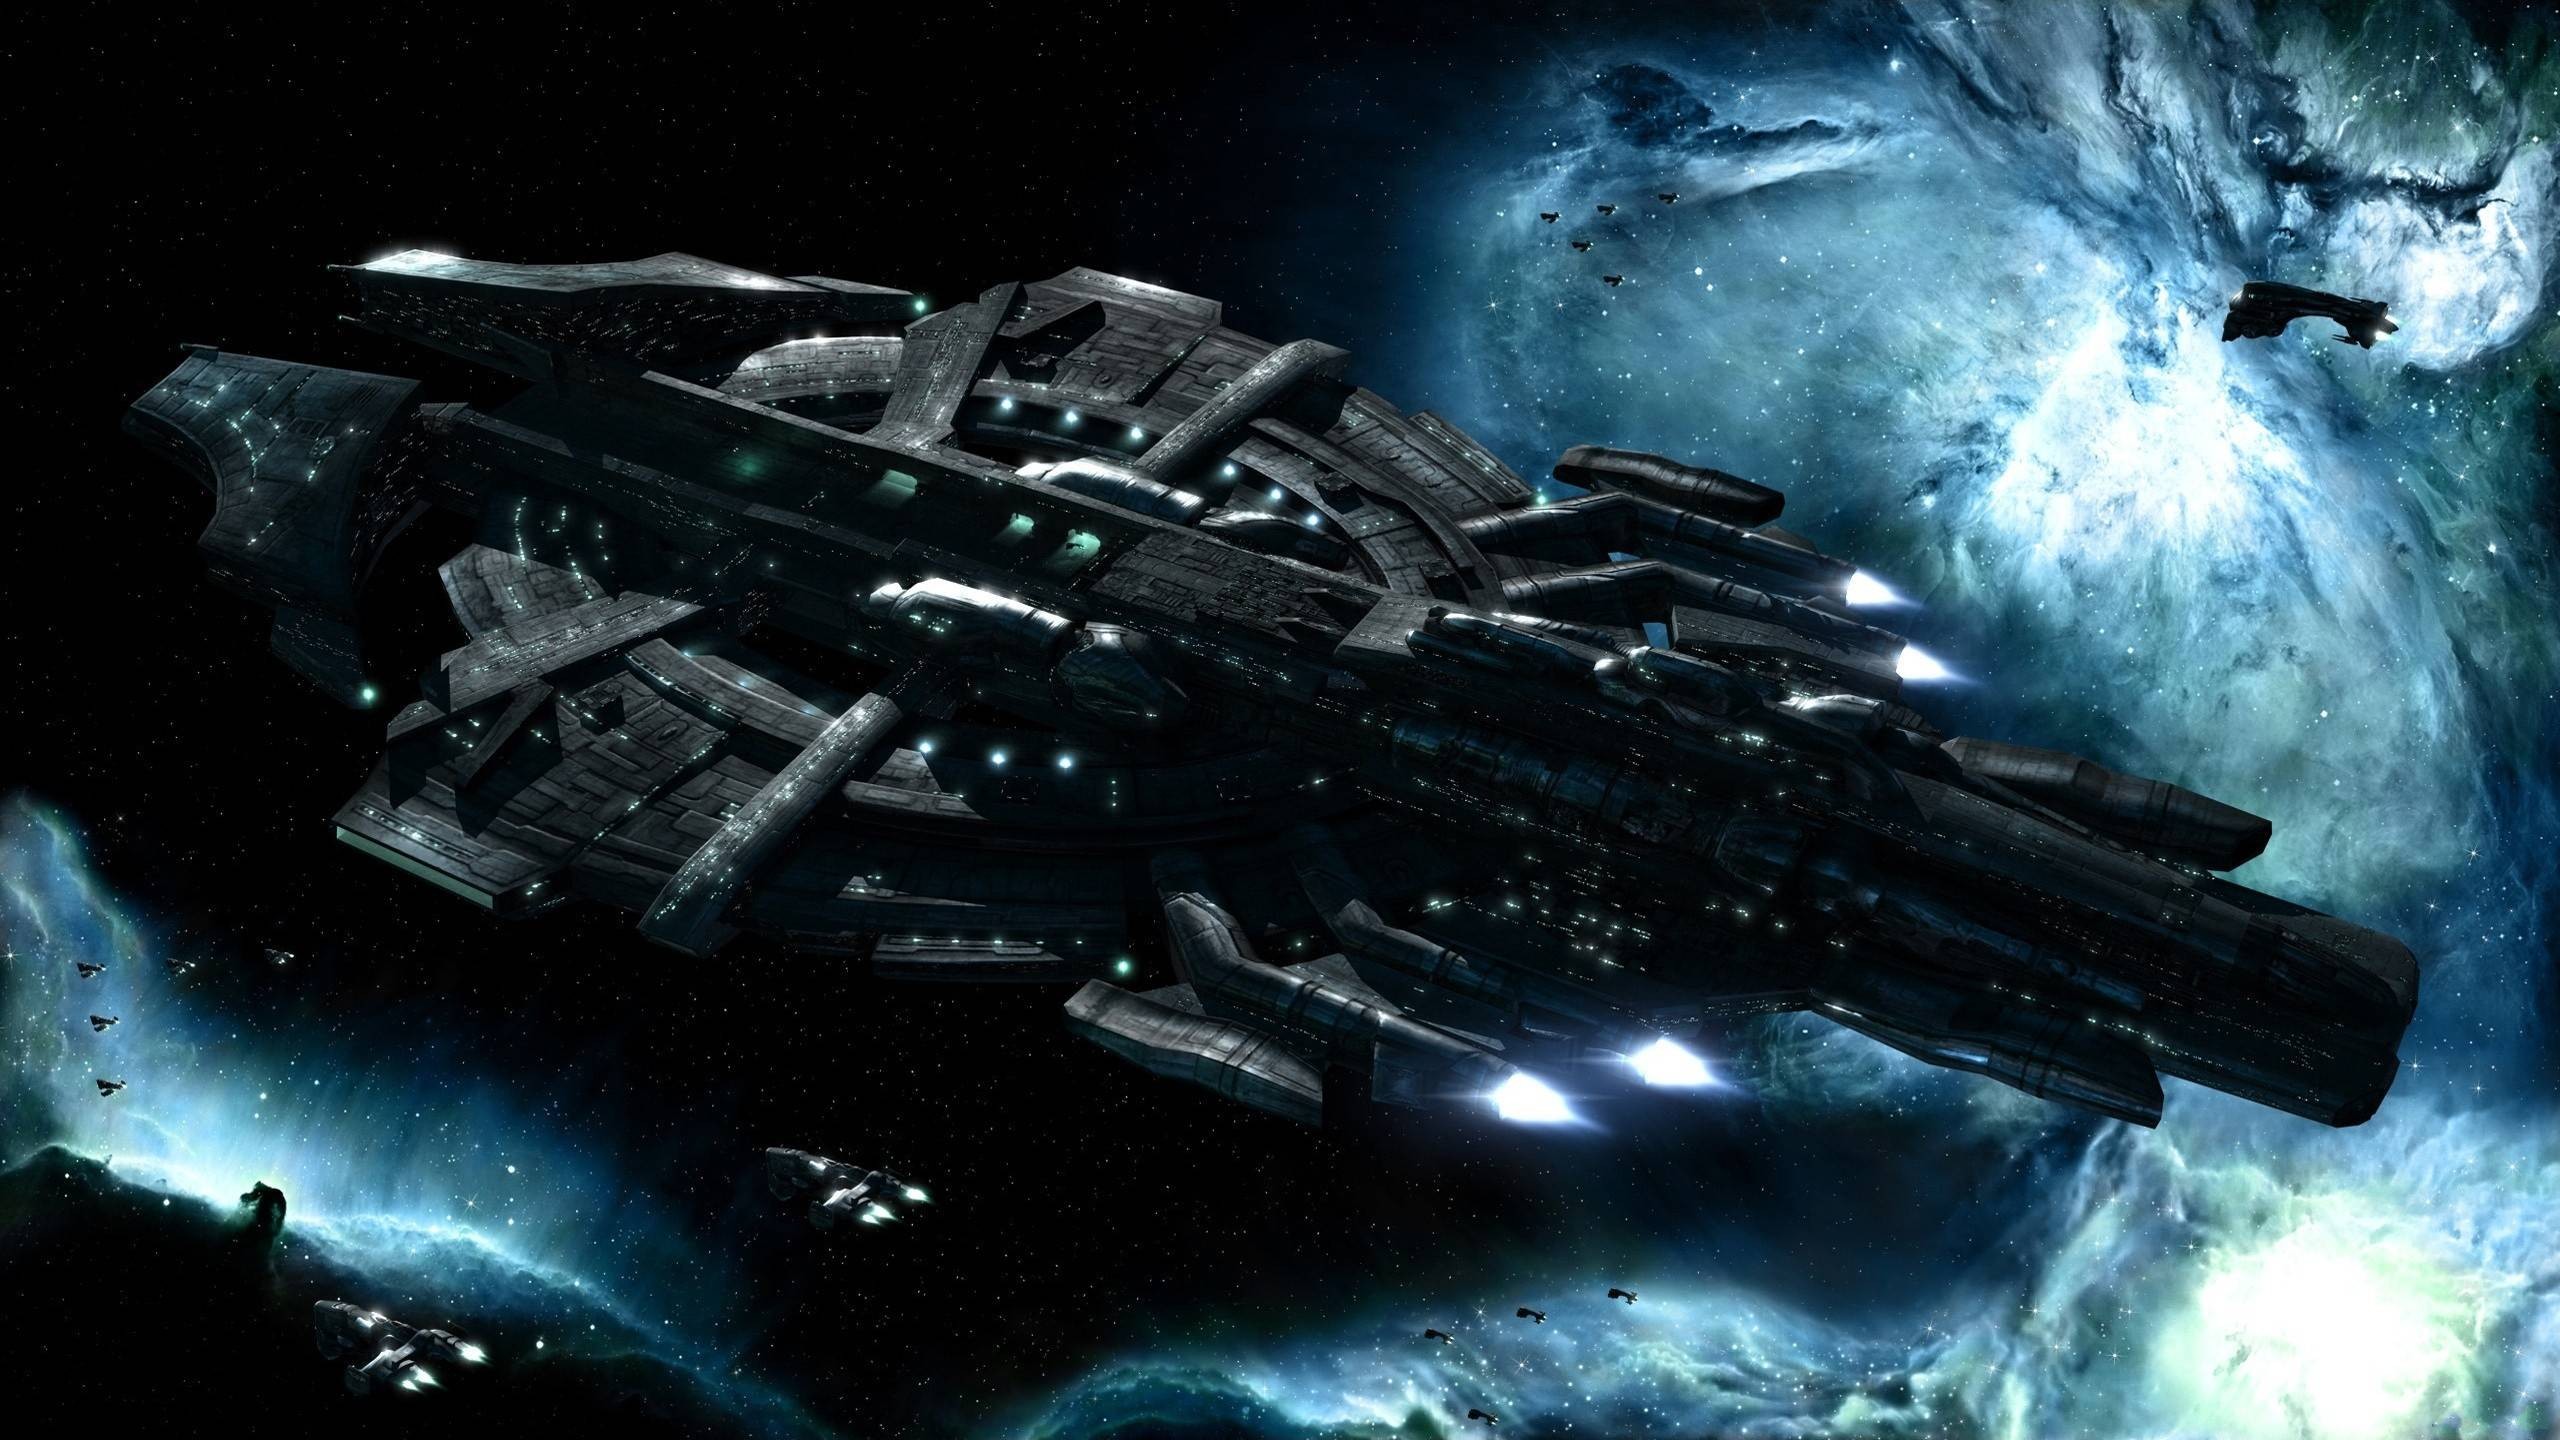 General 2560x1440 space spaceship EVE Online science fiction Gallente video games PC gaming video game art